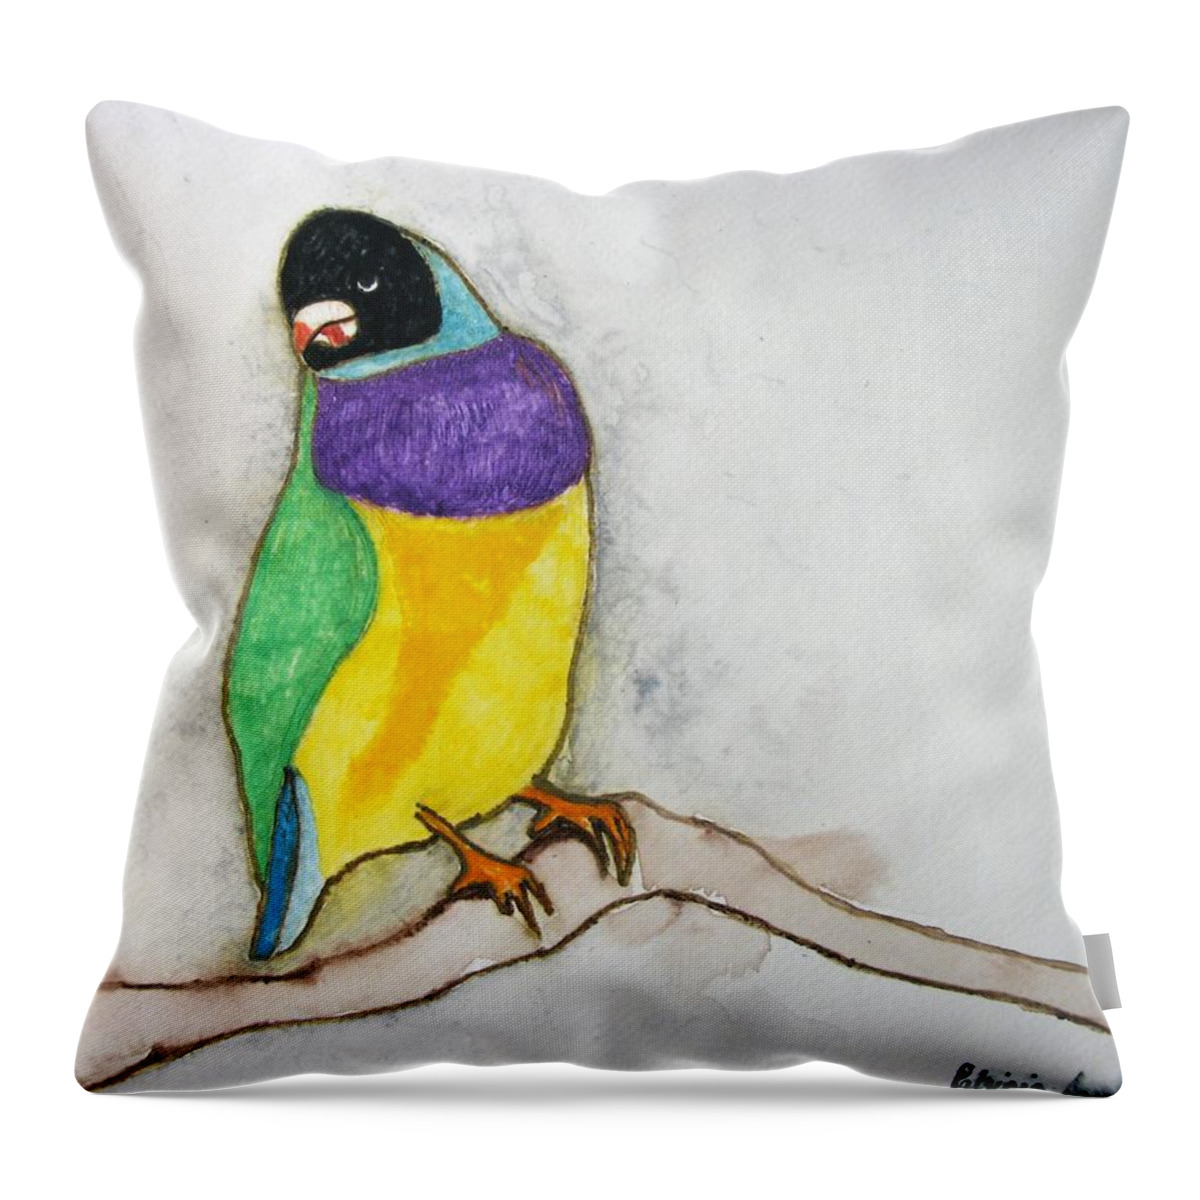 Birds Throw Pillow featuring the painting I Don't Care by Patricia Arroyo